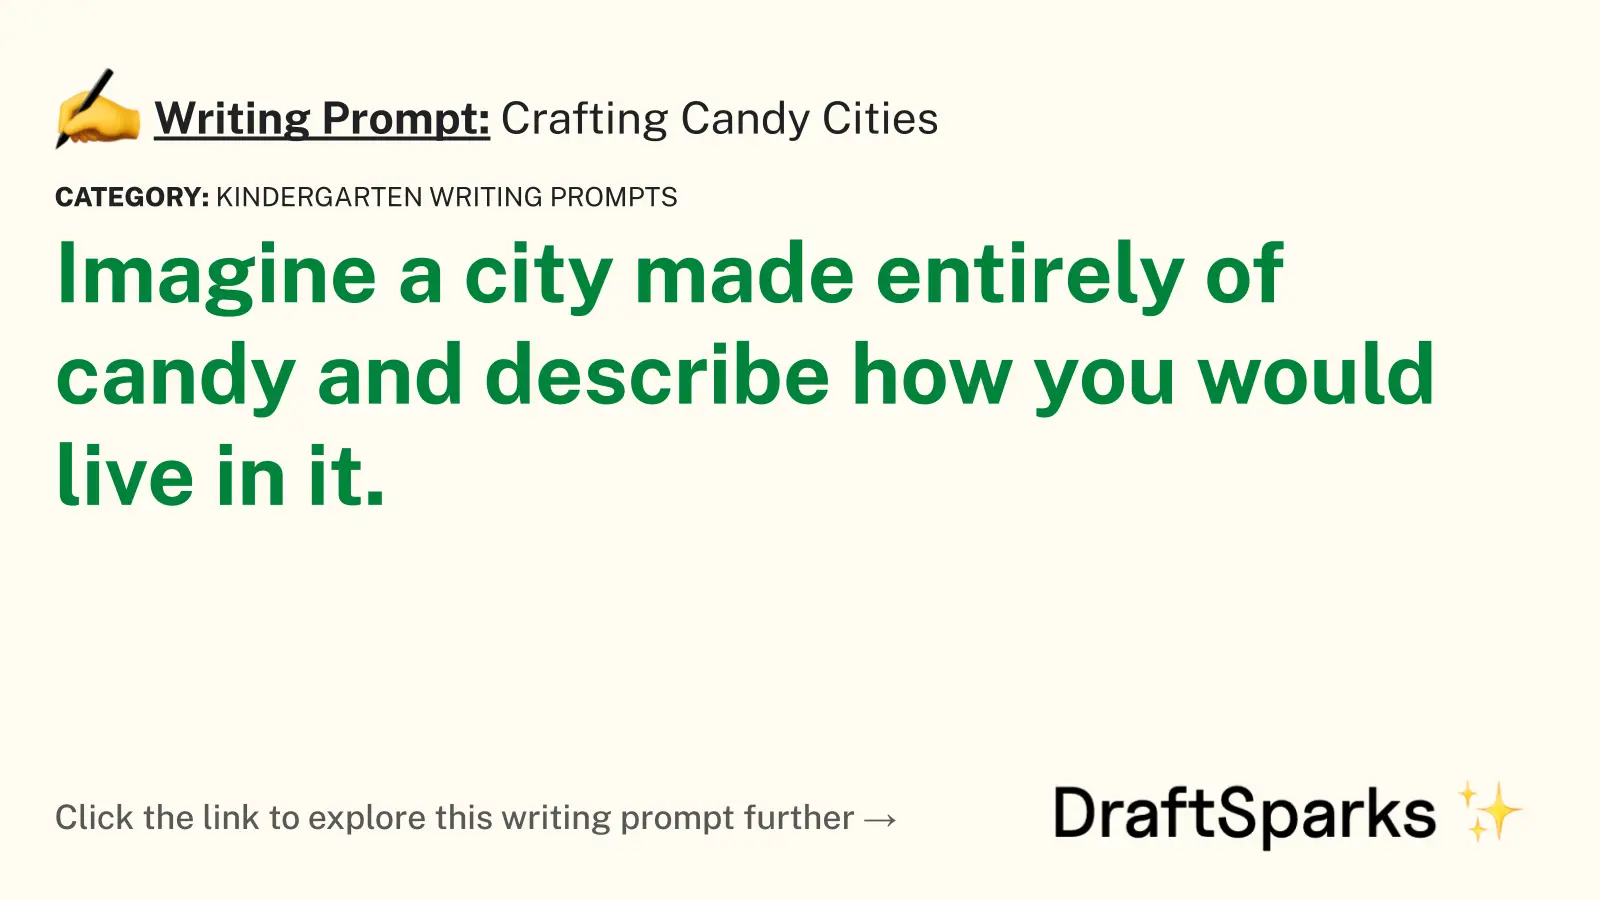 Crafting Candy Cities